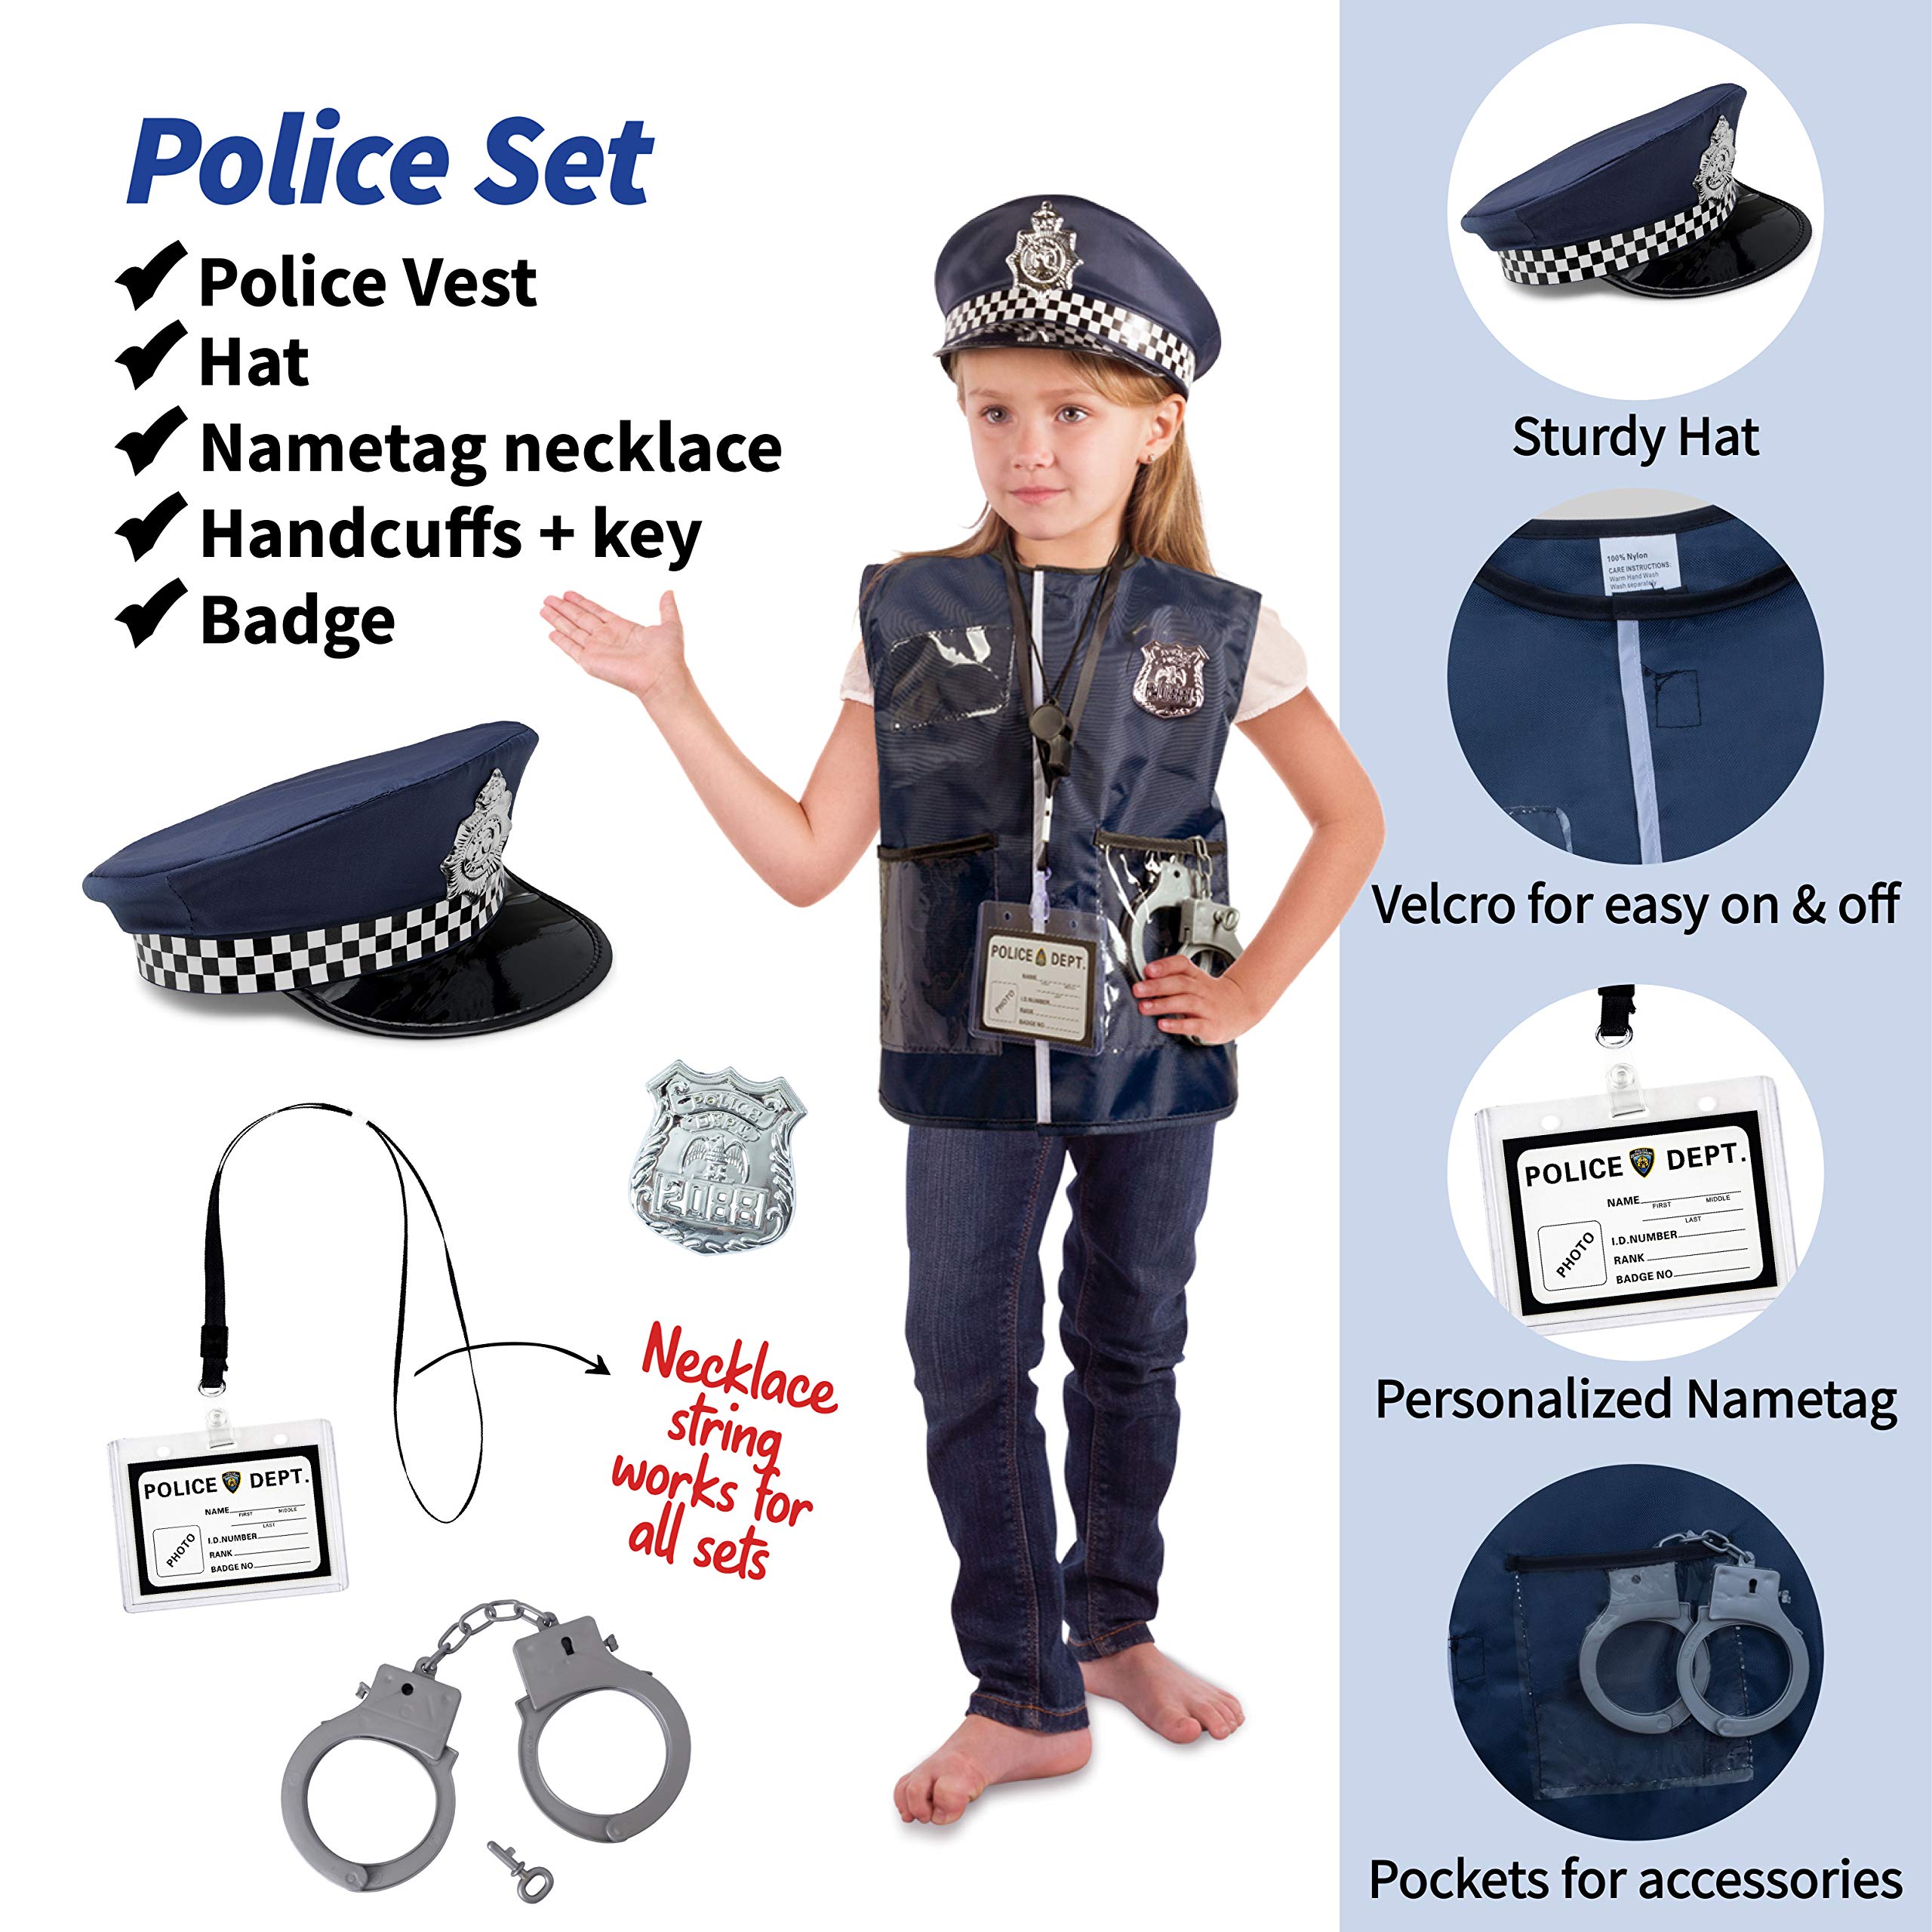 Born Toys Premium 16pcs Costume Dress up set for kids ages 3-7 fireman,police costume, and doctor all sets are washable and have accessories